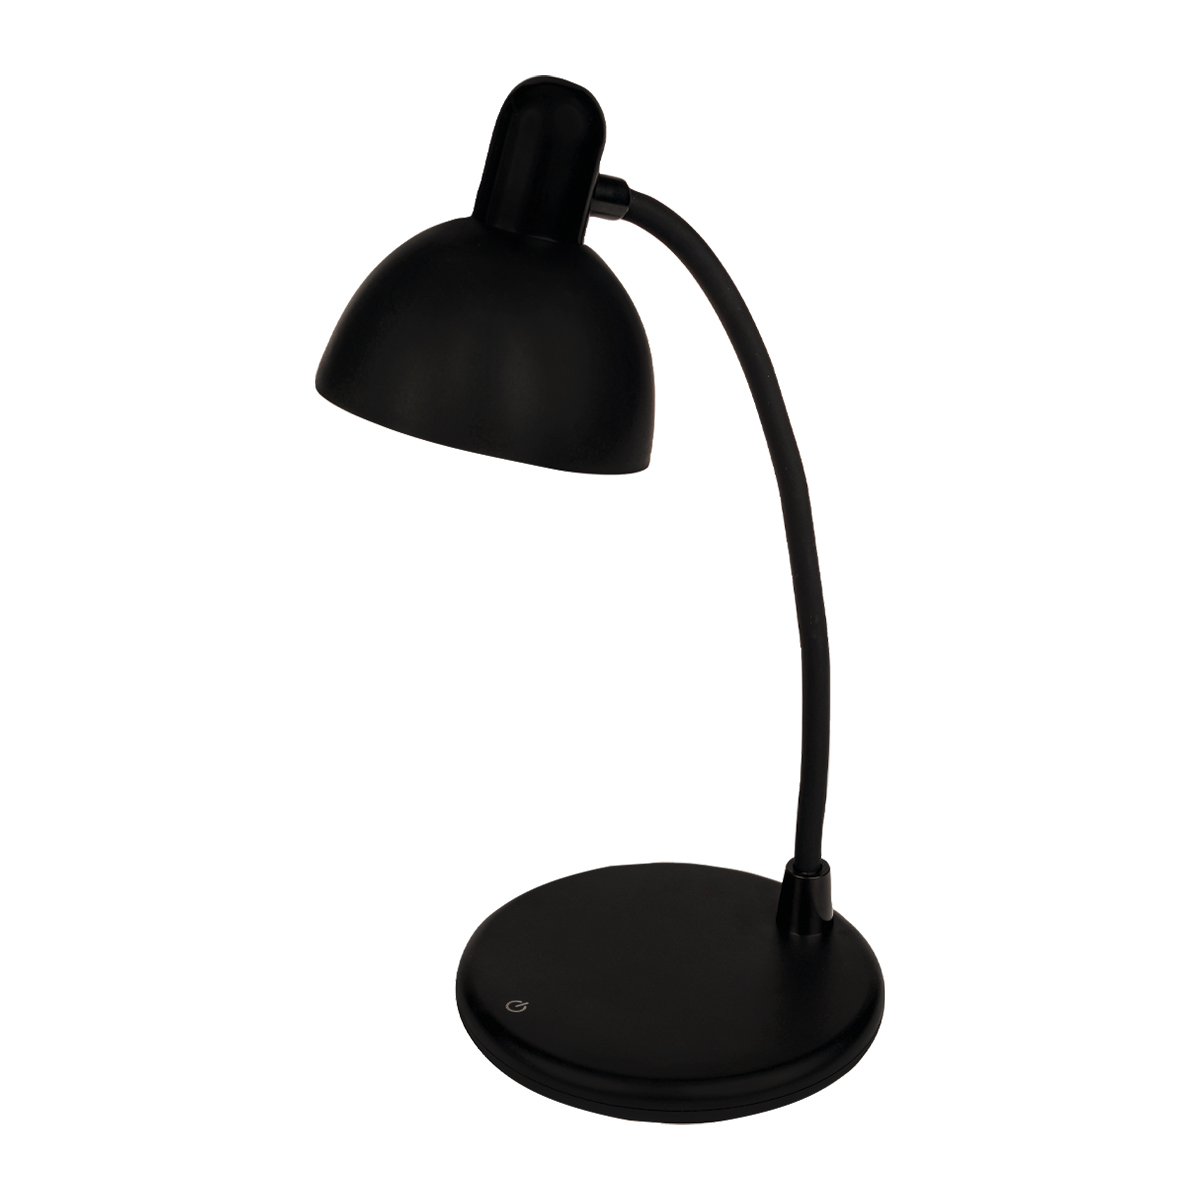 Erie Book Lamp Product Image